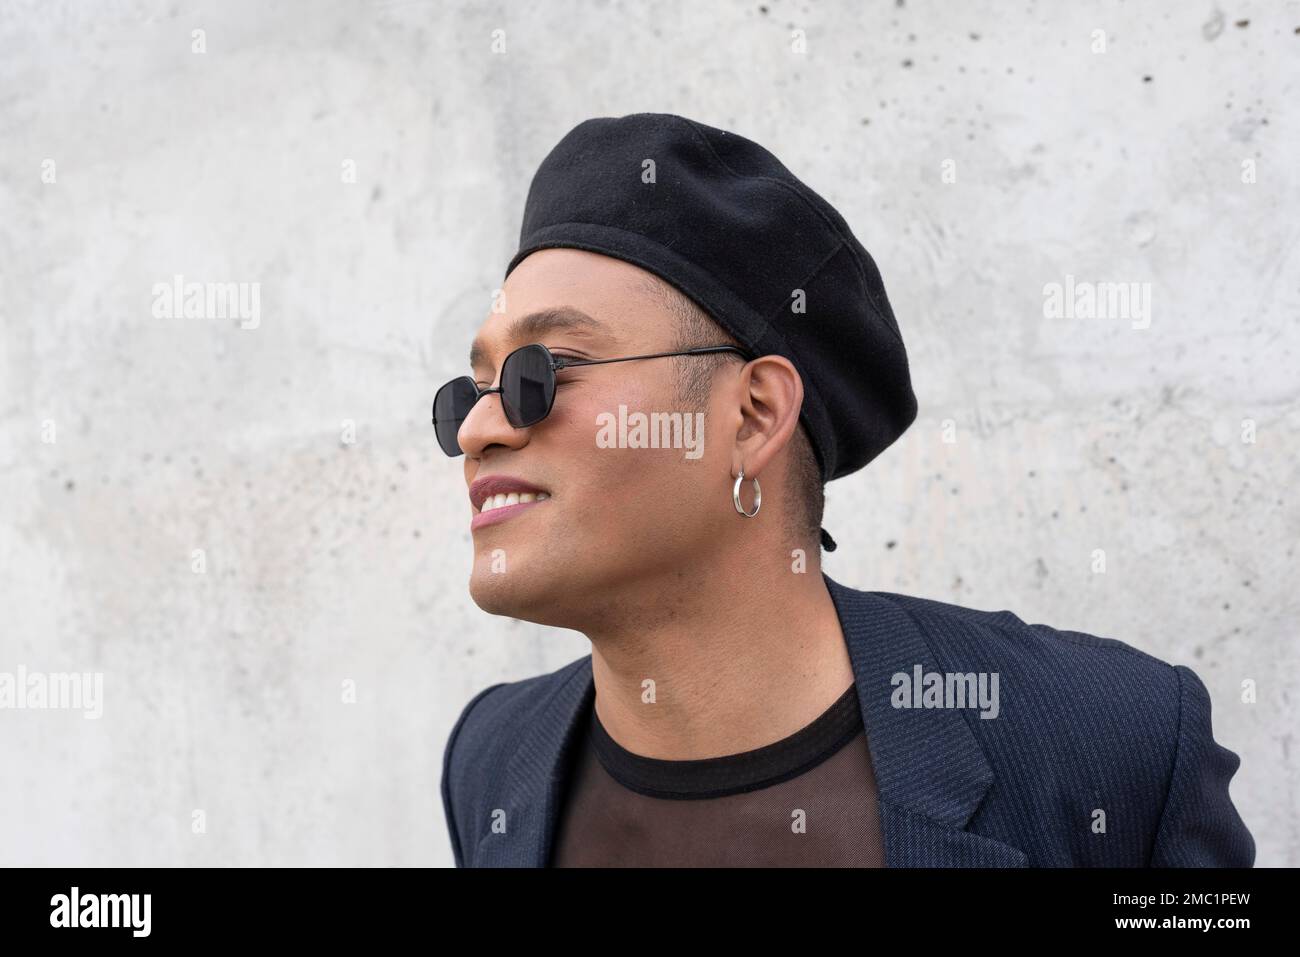 Young latin gay man with make-up on wearing a fashionable hat and sunglasses, isolated on a white background. LGBT Stock Photo